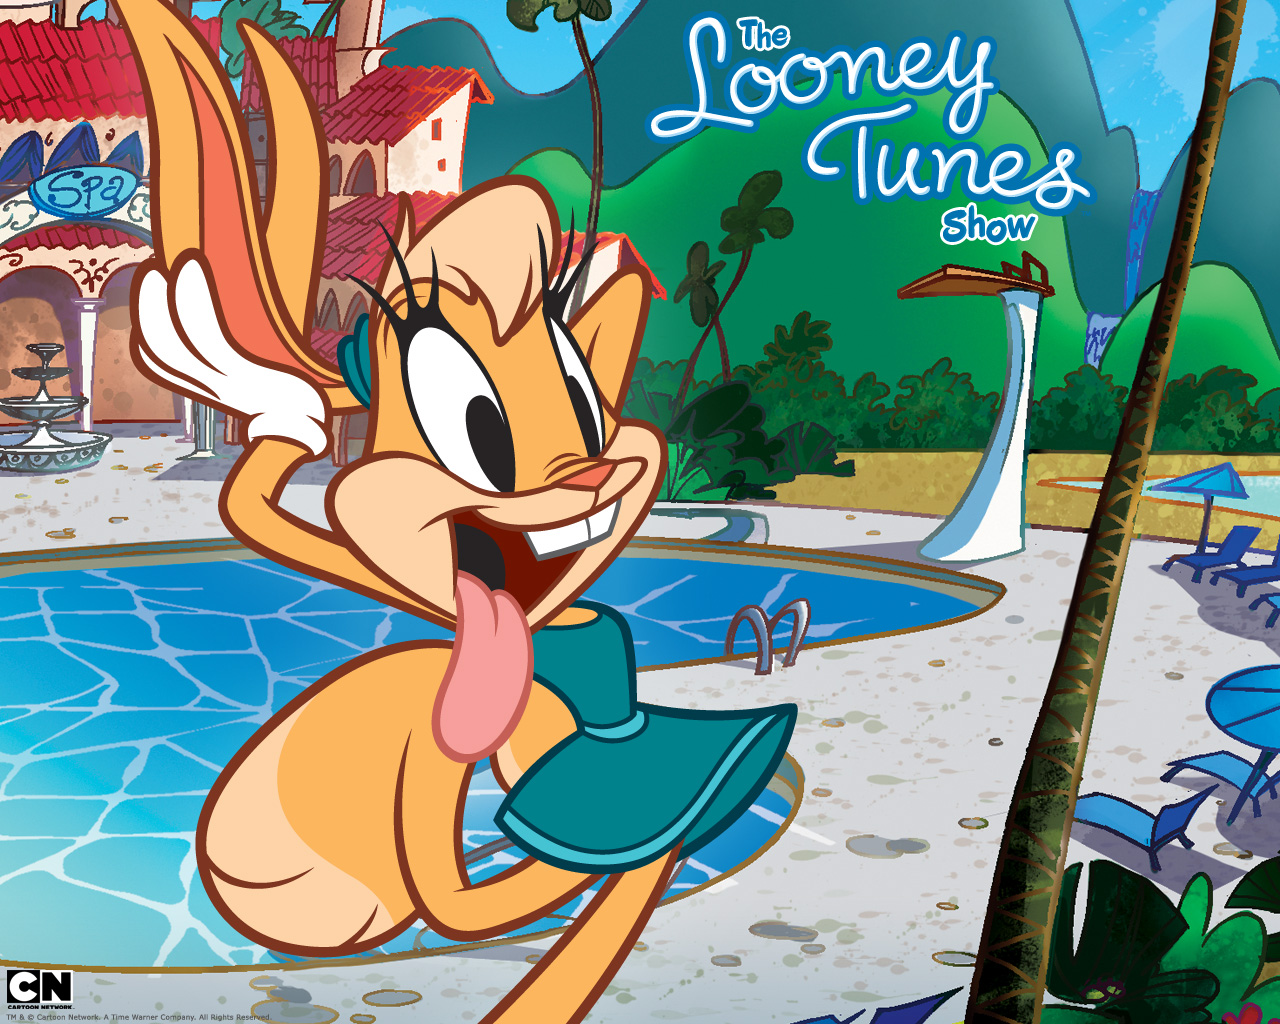 looney tunes characters - The Looney Tunes Show Photo (29012381) - Fanpop